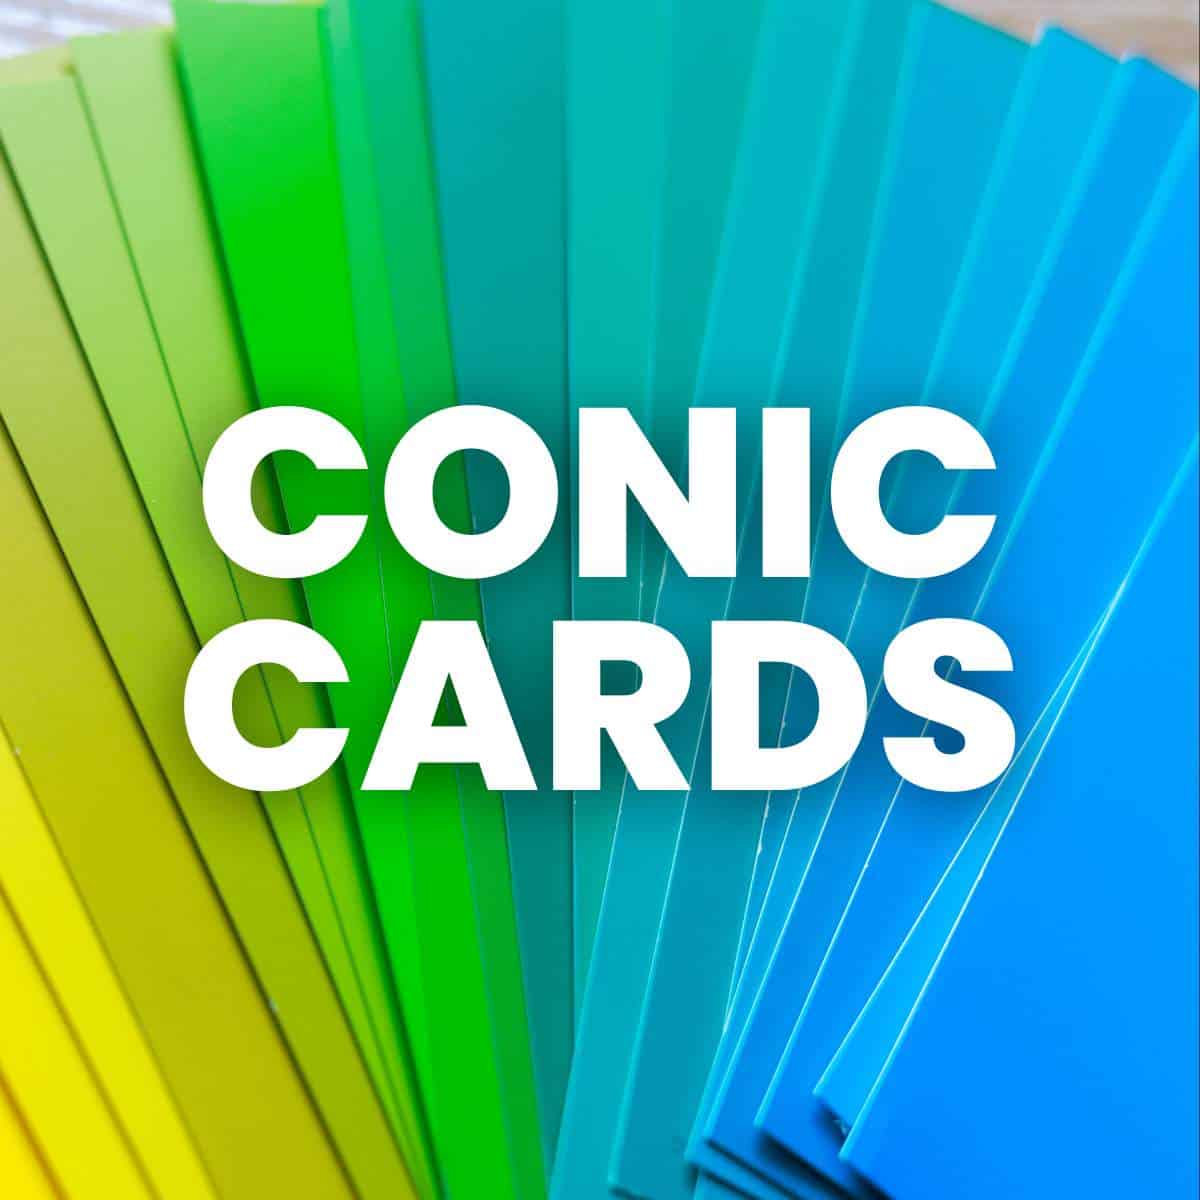 conic cards activity